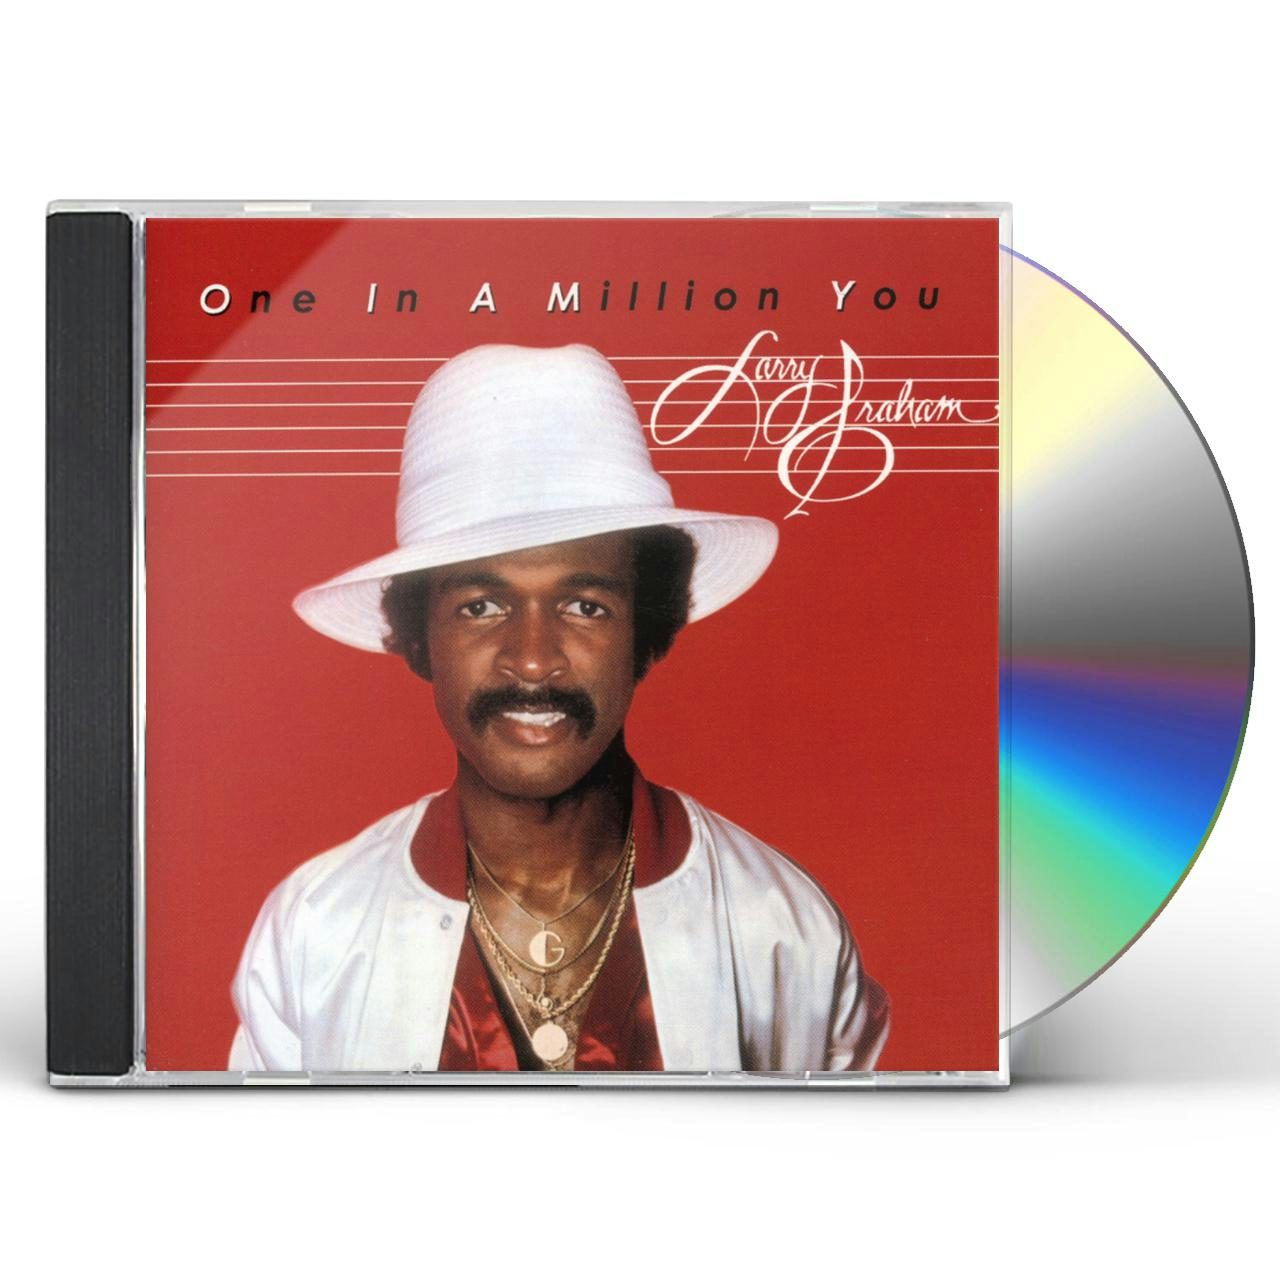 track list for one in a million you larry graham